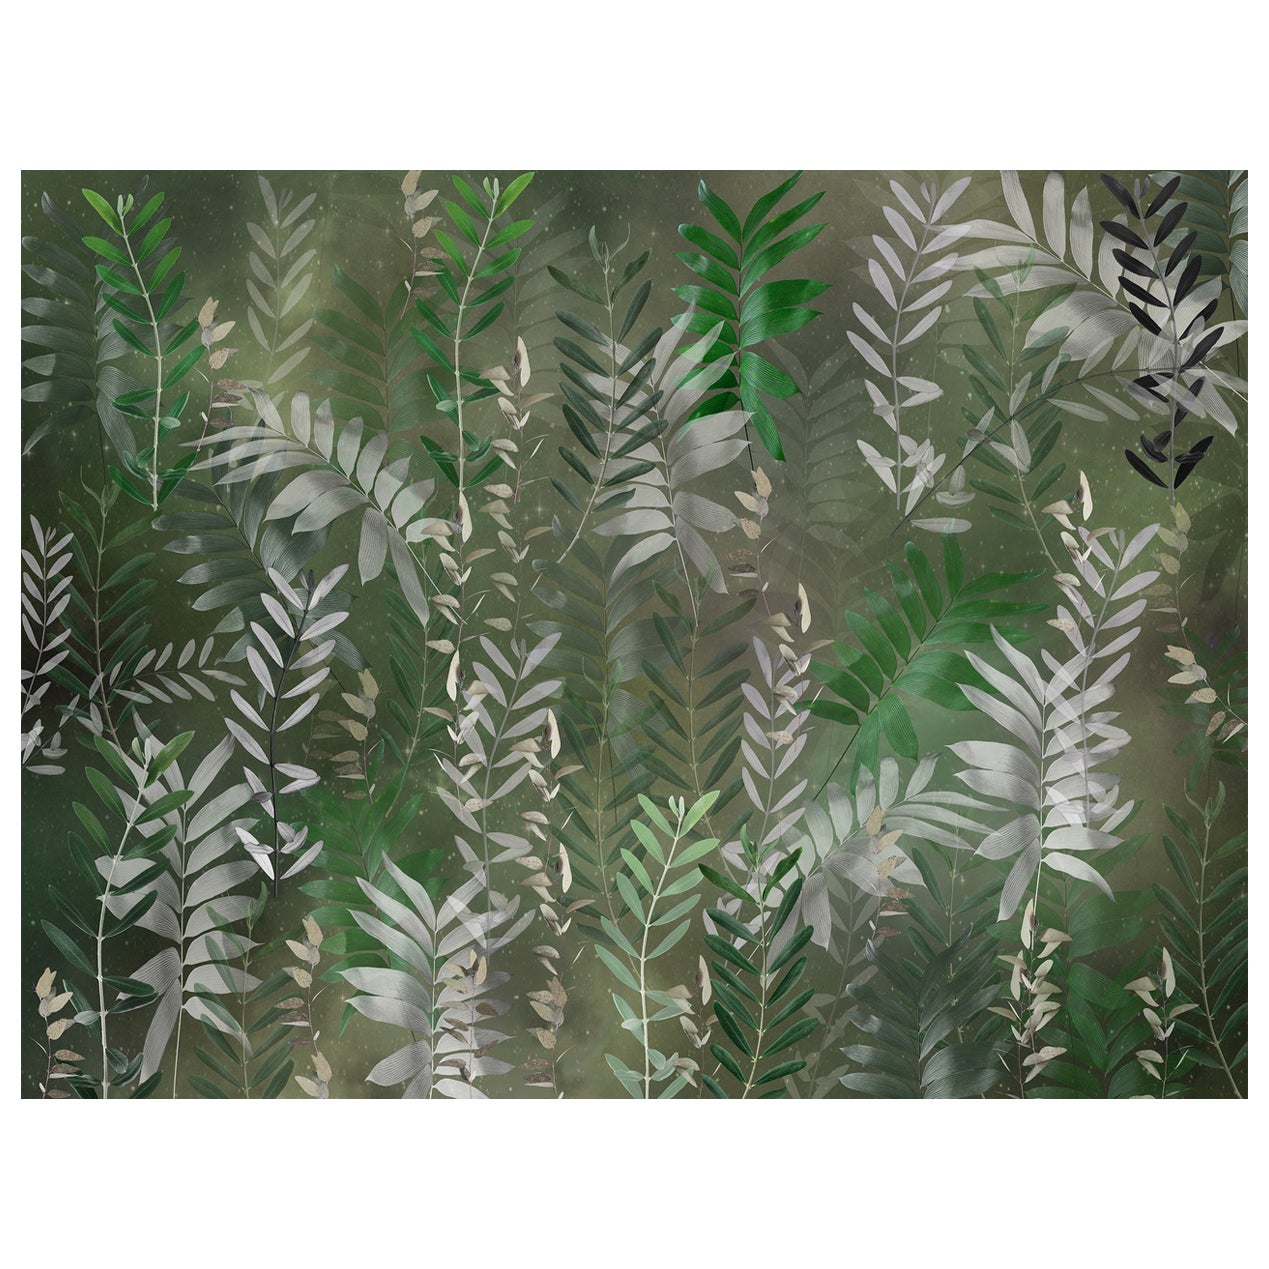 EDGE Collections Ferngully Evergreen Mural